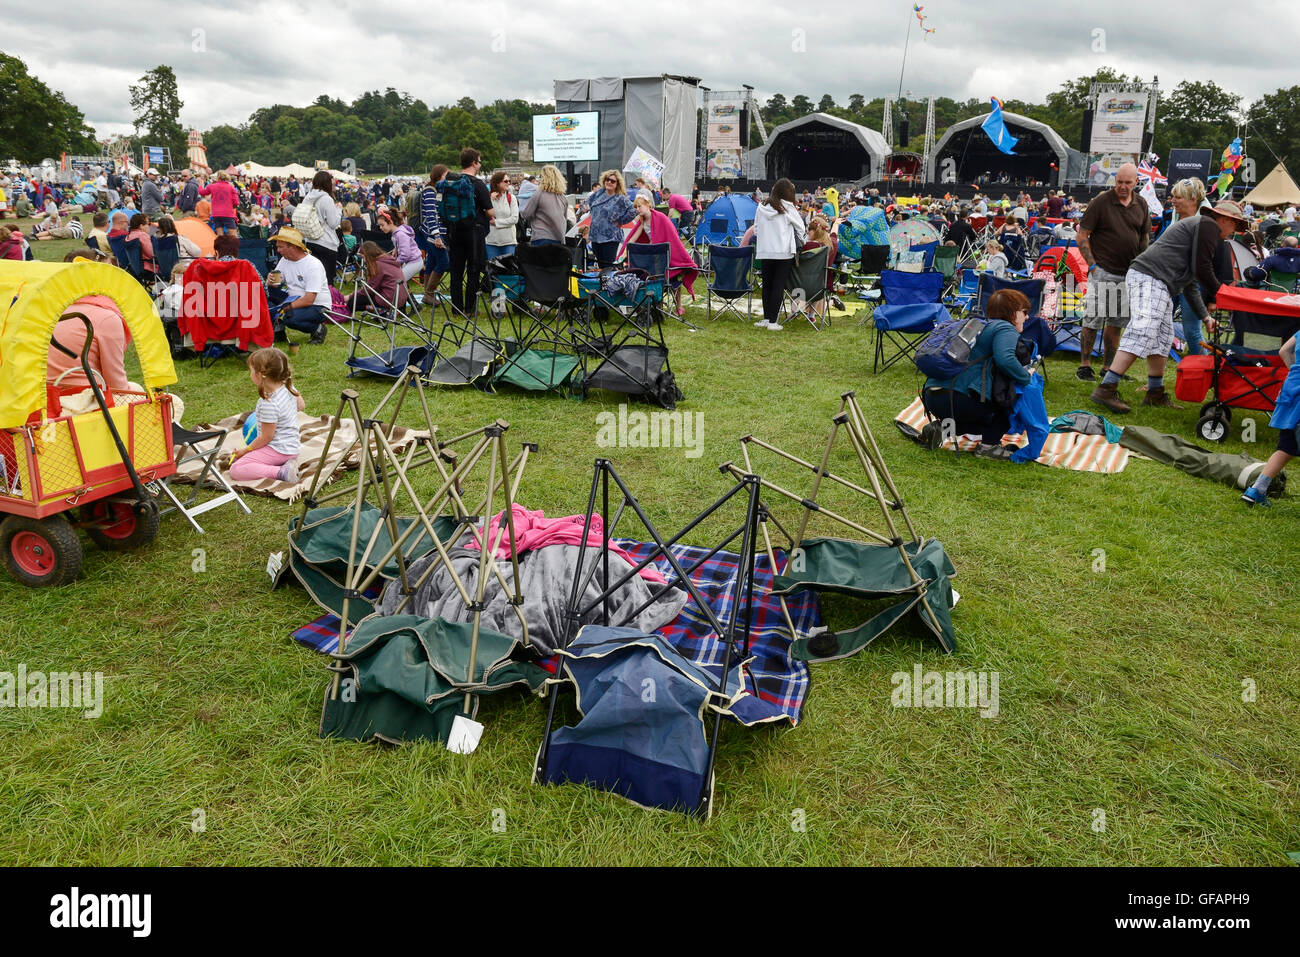 Carfest North, Bolesworth, Cheshire, UK. 30th July 2016. People saving their space at the Main stage. The event is the brainchild of Chris Evans and features 3 days of cars, music and entertainment with profits being donated to the charity Children in Need. Andrew Paterson/Alamy Live News Stock Photo